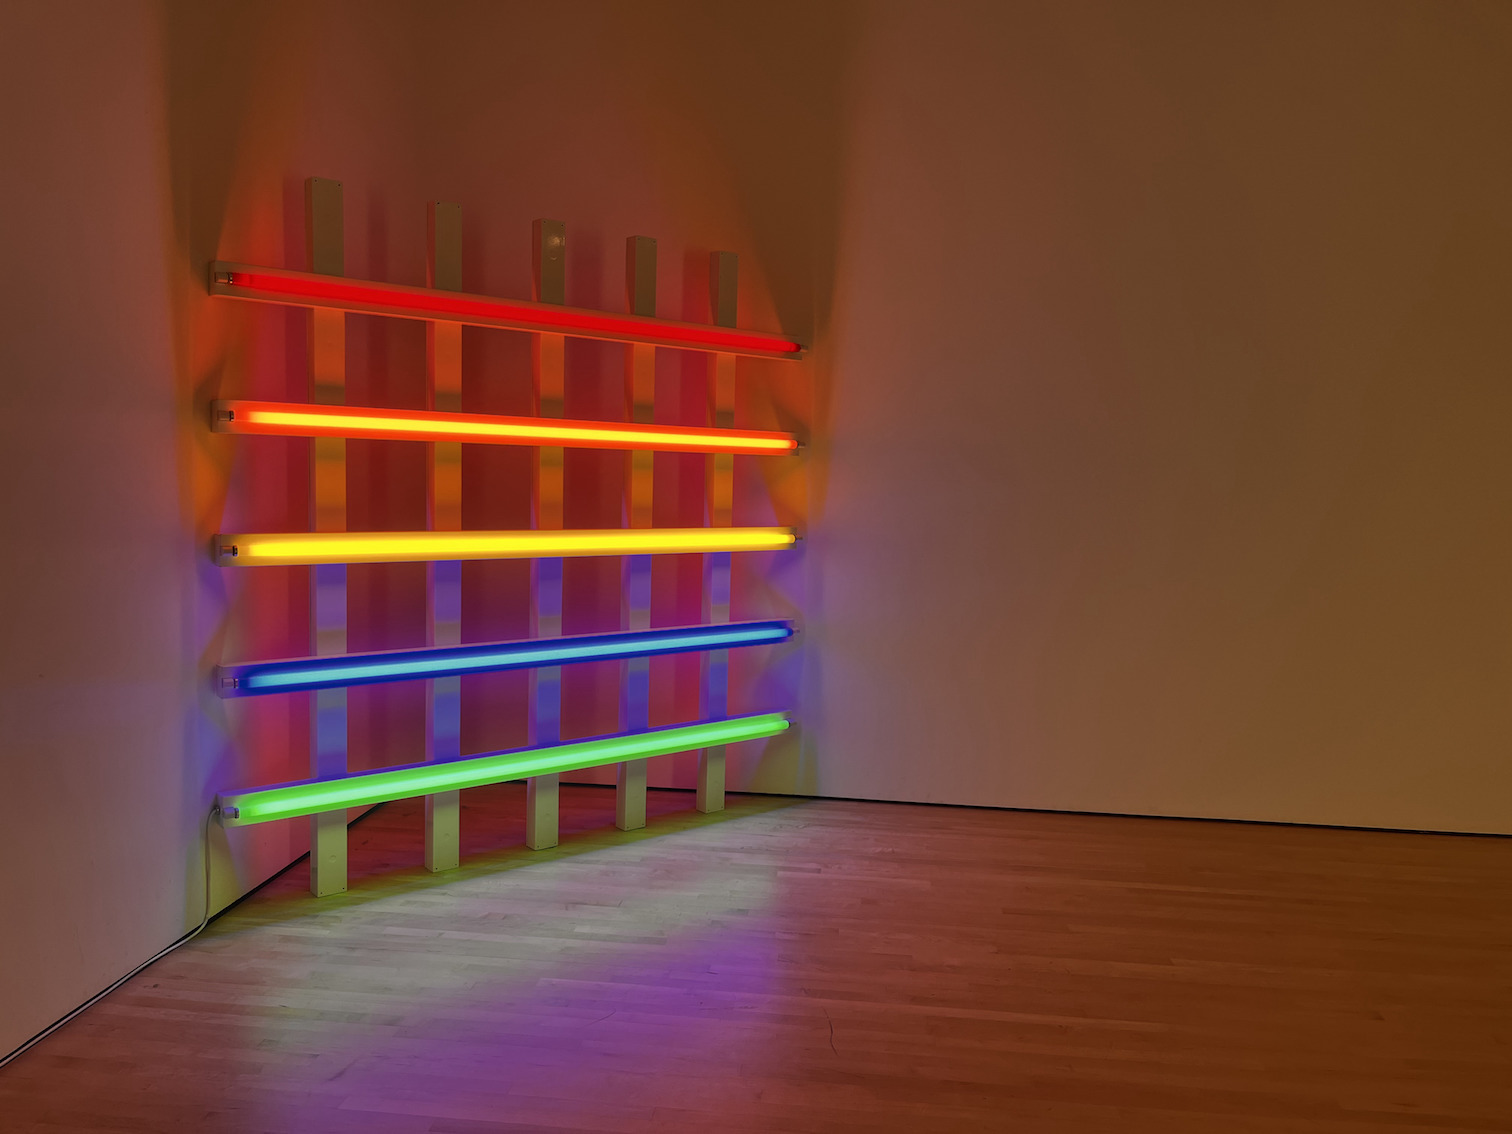 Disability Accessibility at SFMOMA.
Dan Flavin's Untitled. A gridded rainbow neon light sculpture, illuminating a corner of the room.